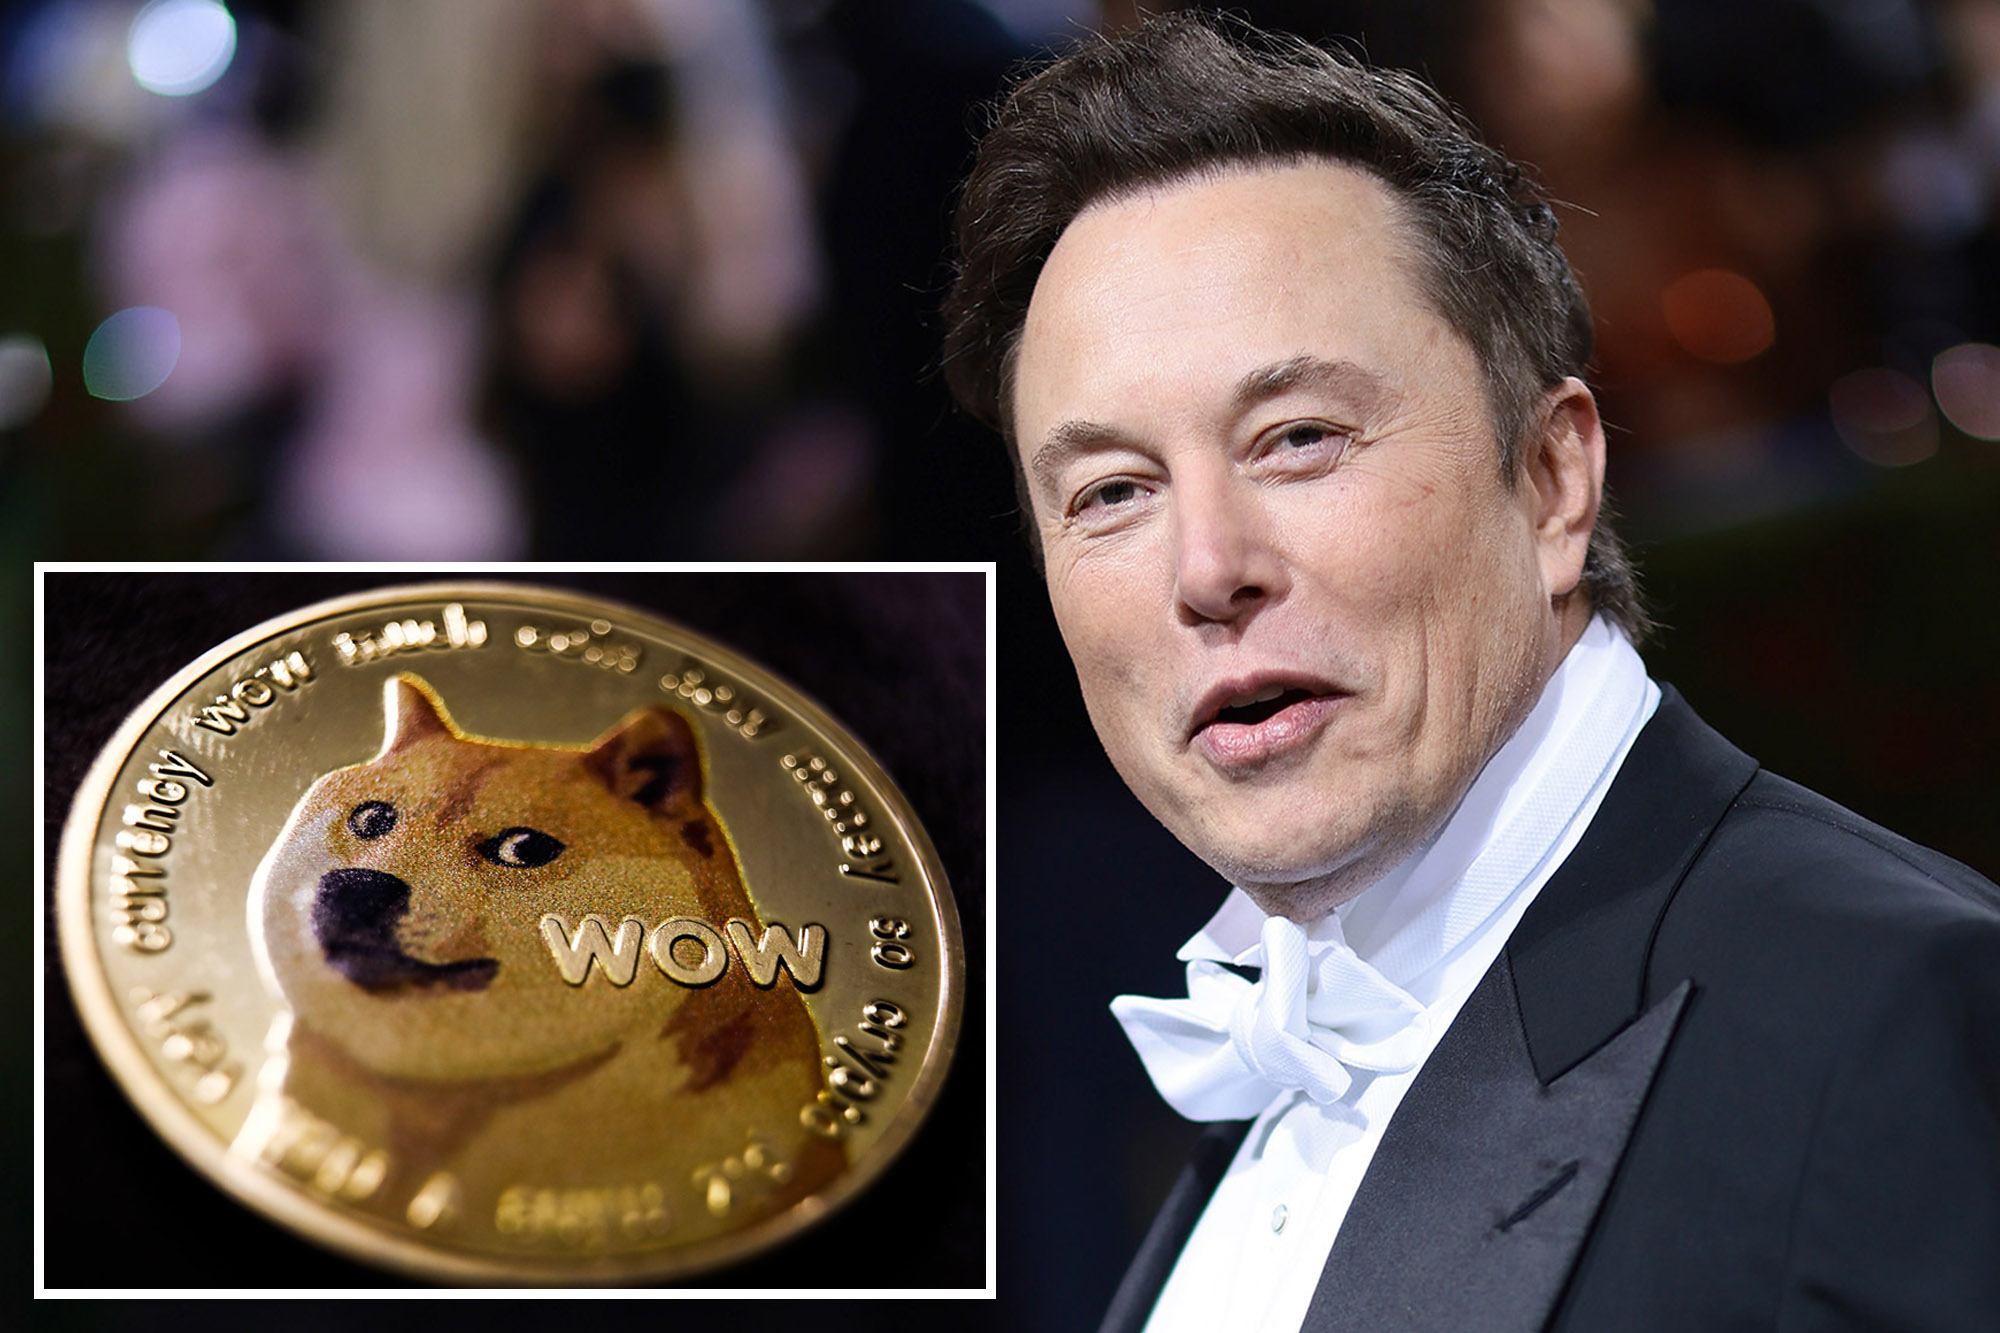 Elon Musk advocates Dogecoin as a potential currency